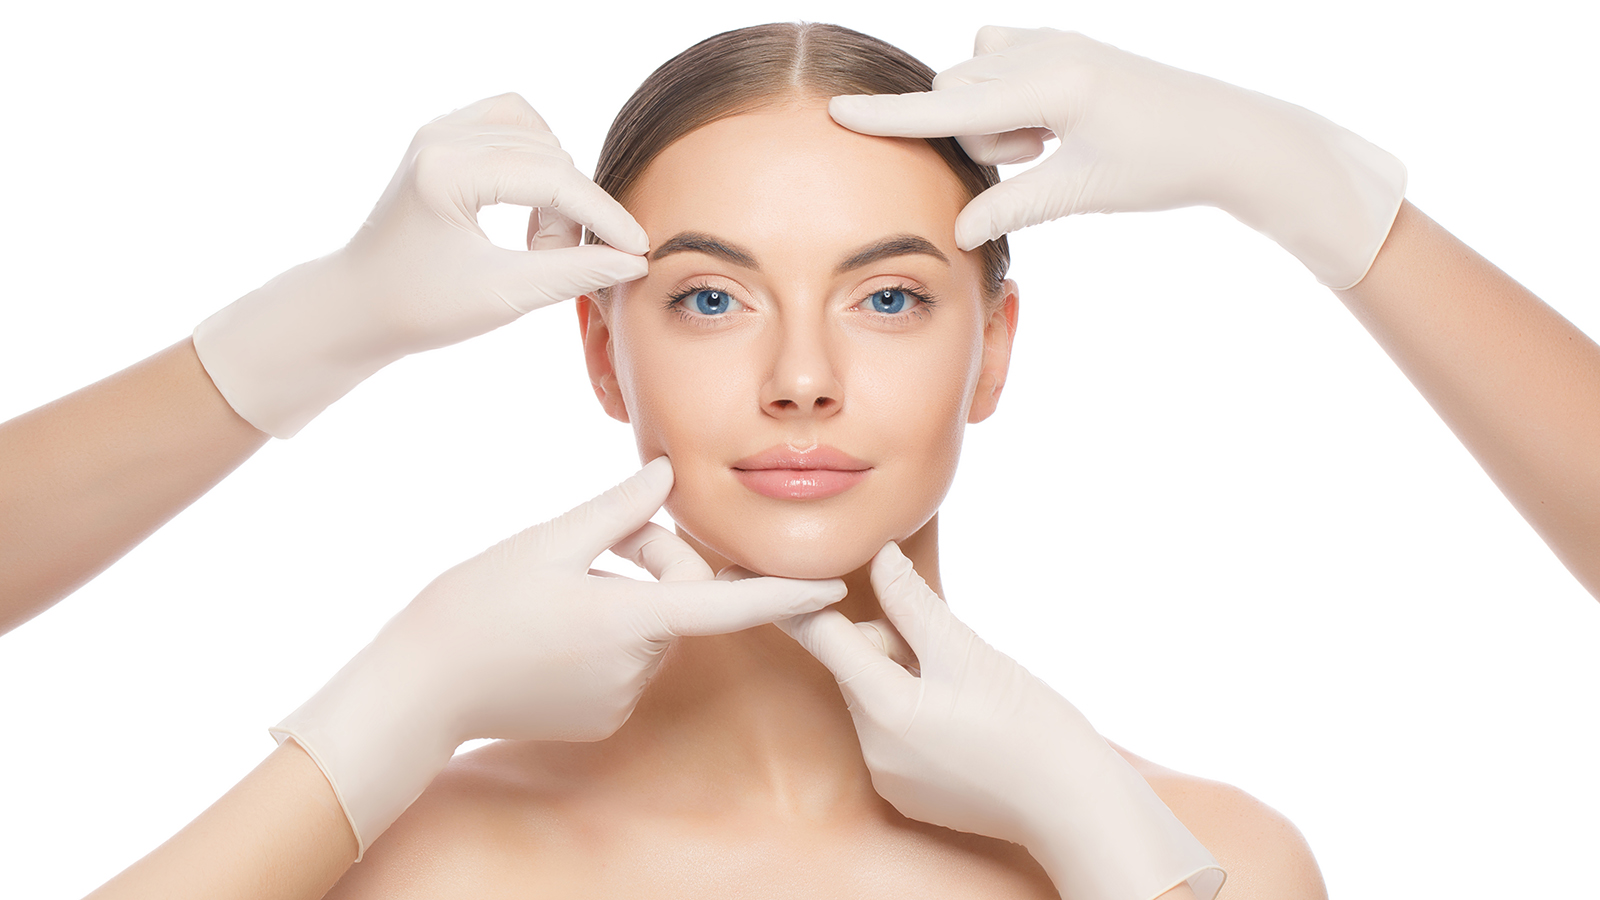 Close-up portrait of young female standing with naked skin, face is touched by doctors in gloves, preparing her for plastic surgery procedures, isolated on white background